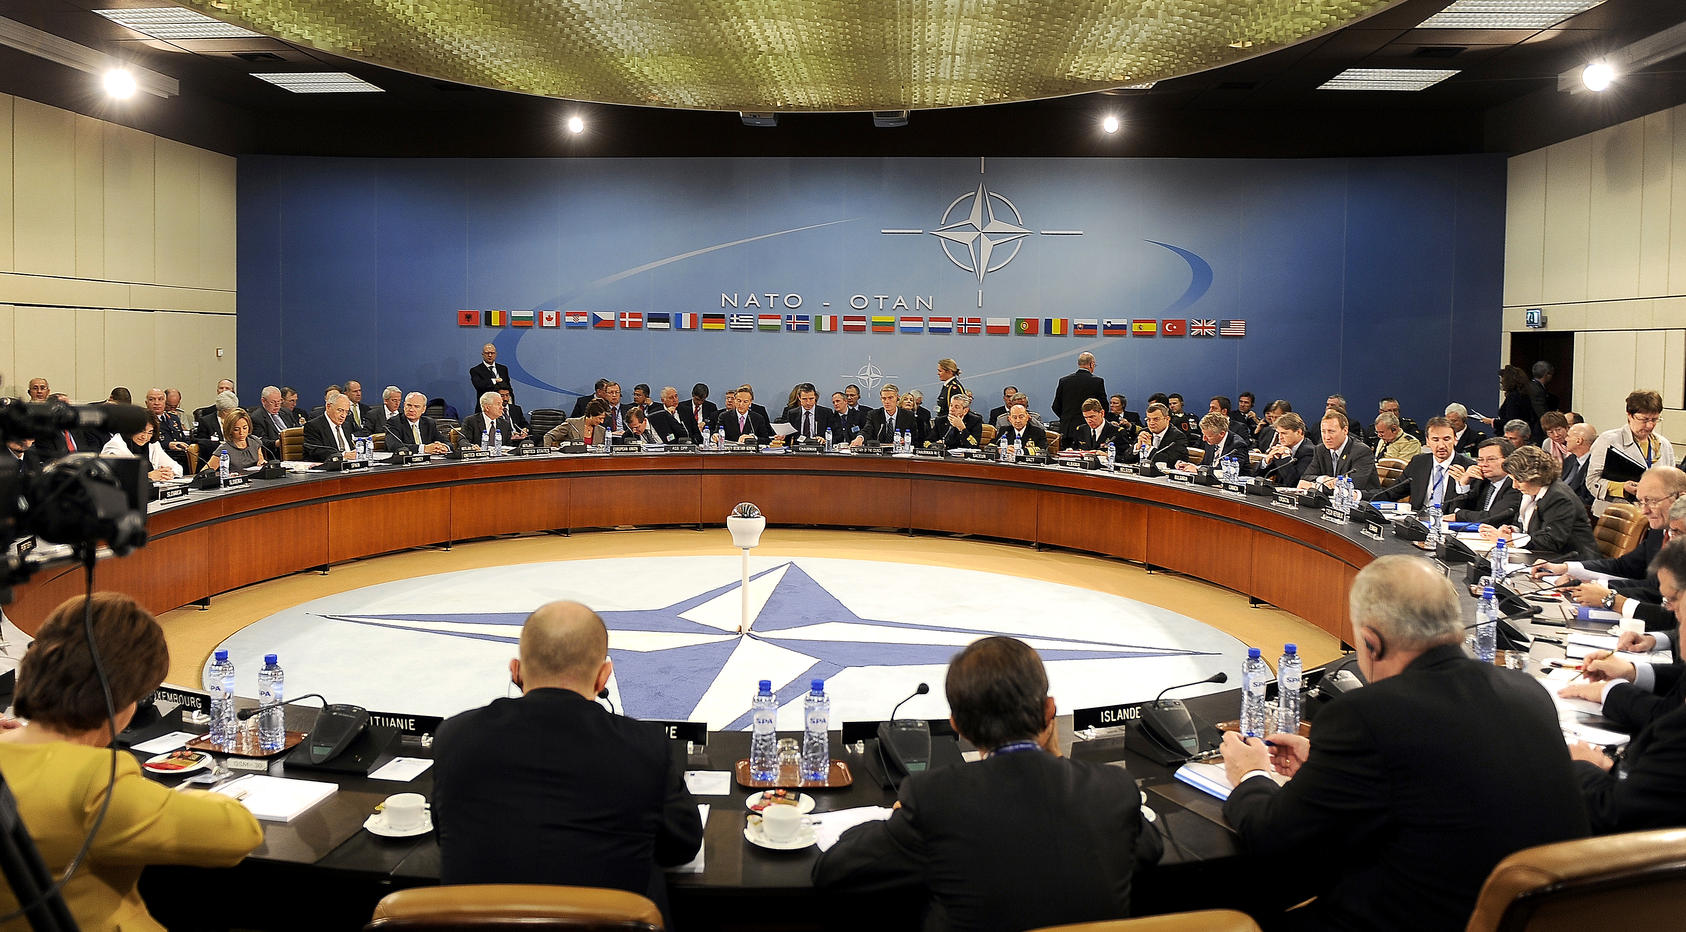 U.S. Defense Secretary Robert M. Gates and other members of NATO Ministers of Defense and of Foreign Affairs meet at NATO headquarters in Brussels, Belgium, Oct. 14, 2010, to give political guidance for the November meeting of Allied Heads of State and Government at the NATO Summit in Lisbon, Portugal.